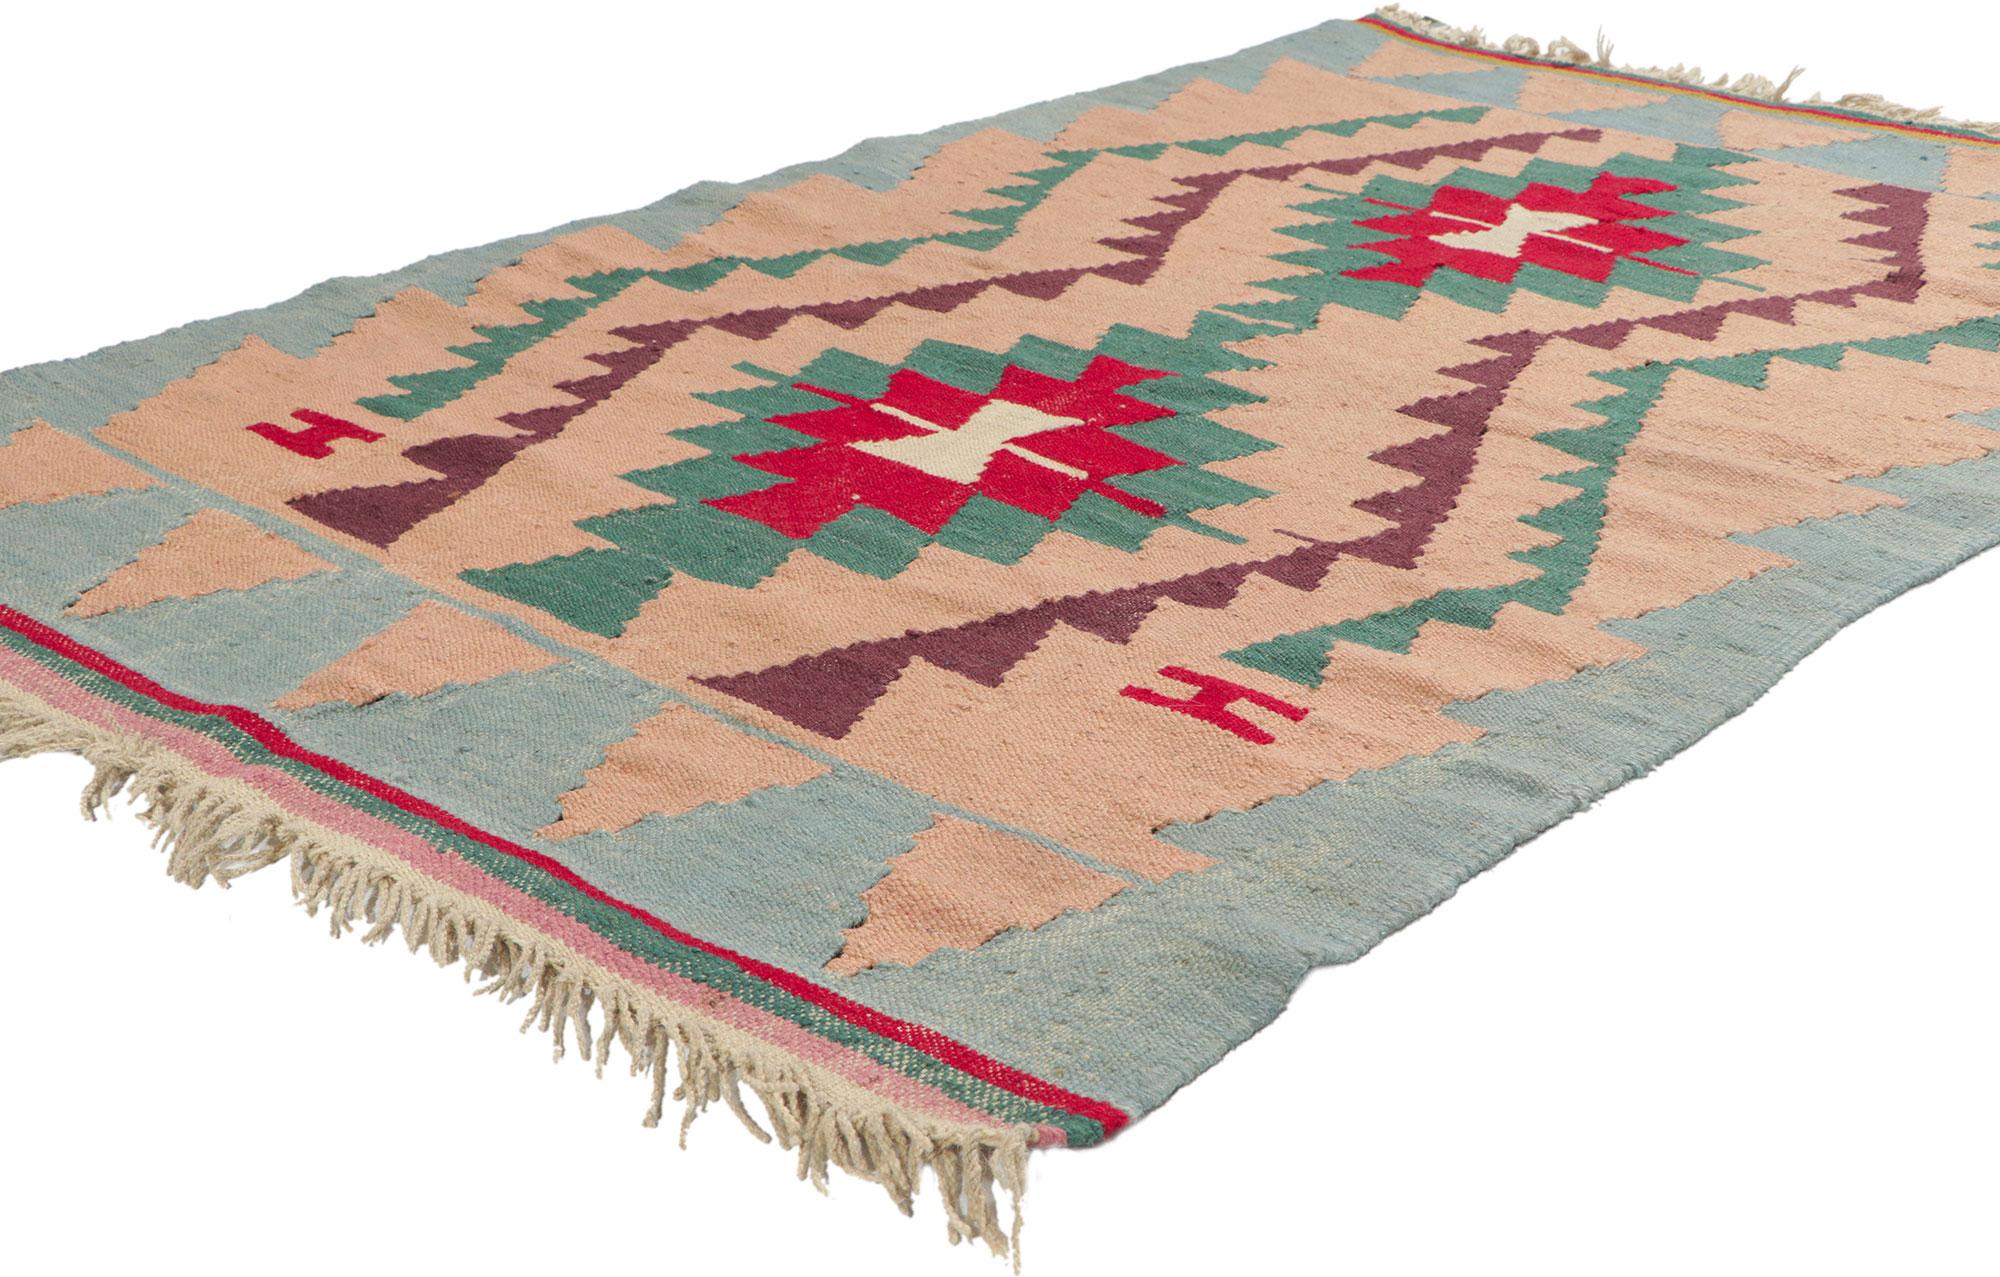 78068 Vintage Persian Shiraz Kilim Rug, 03'09 x 06'00. Full of tiny details and a bold expressive design, this handwoven wool vintage Shiraz Kilim rug is a captivating vision of woven beauty. The abrashed field is composed of two concentric star